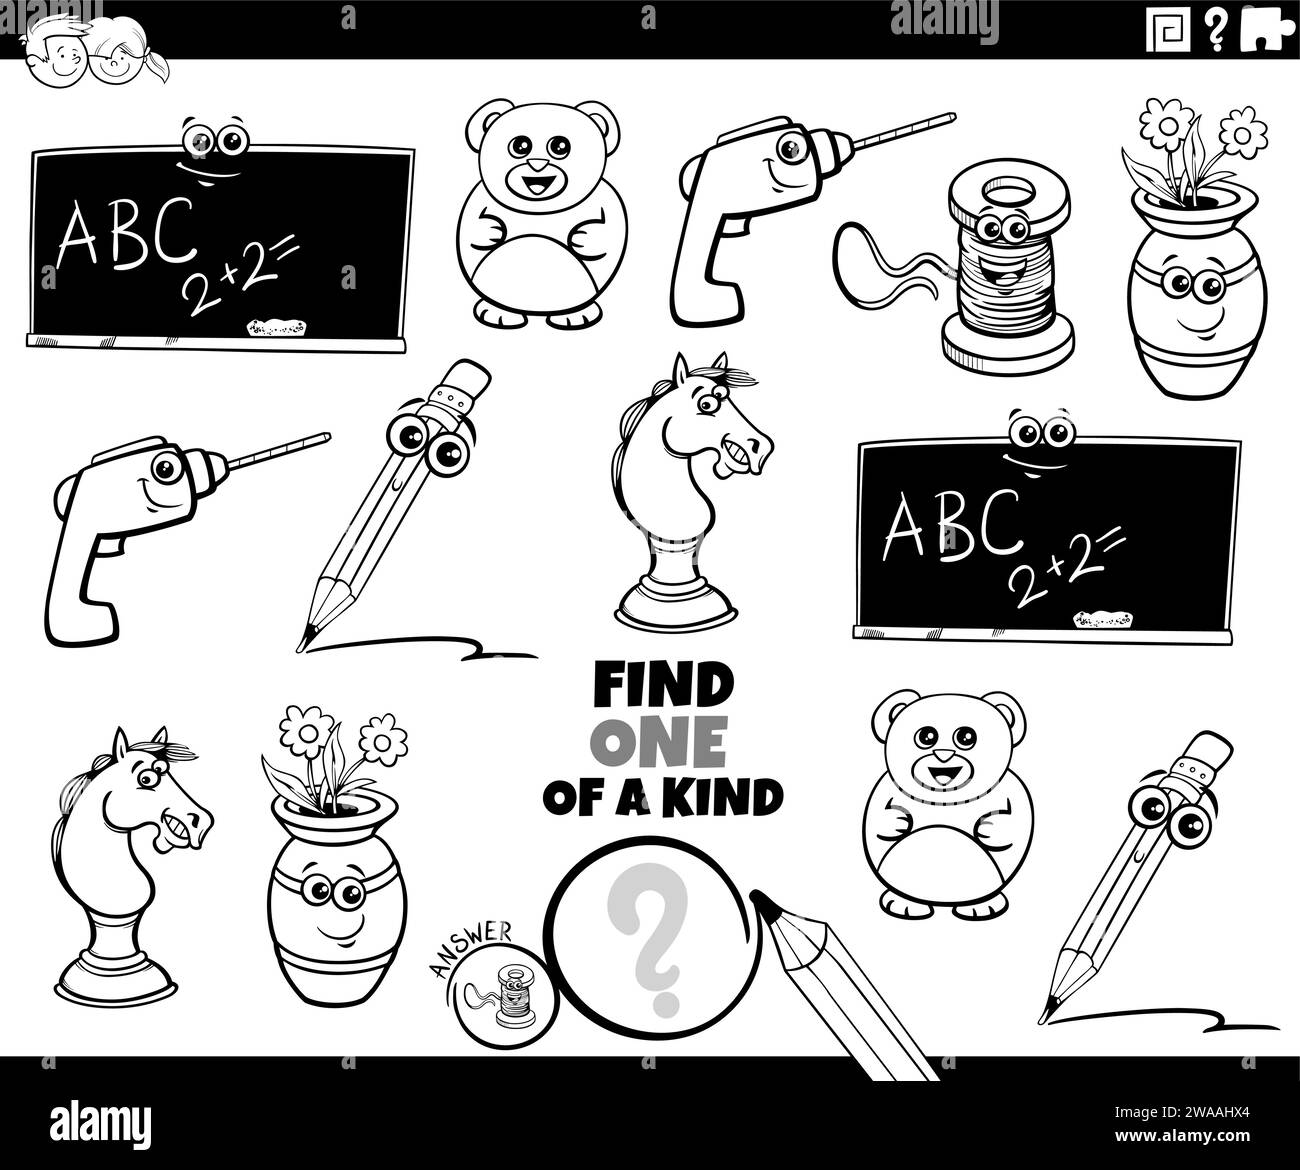 Cartoon illustration of find one of a kind picture educational game with objects characters coloring page Stock Vector